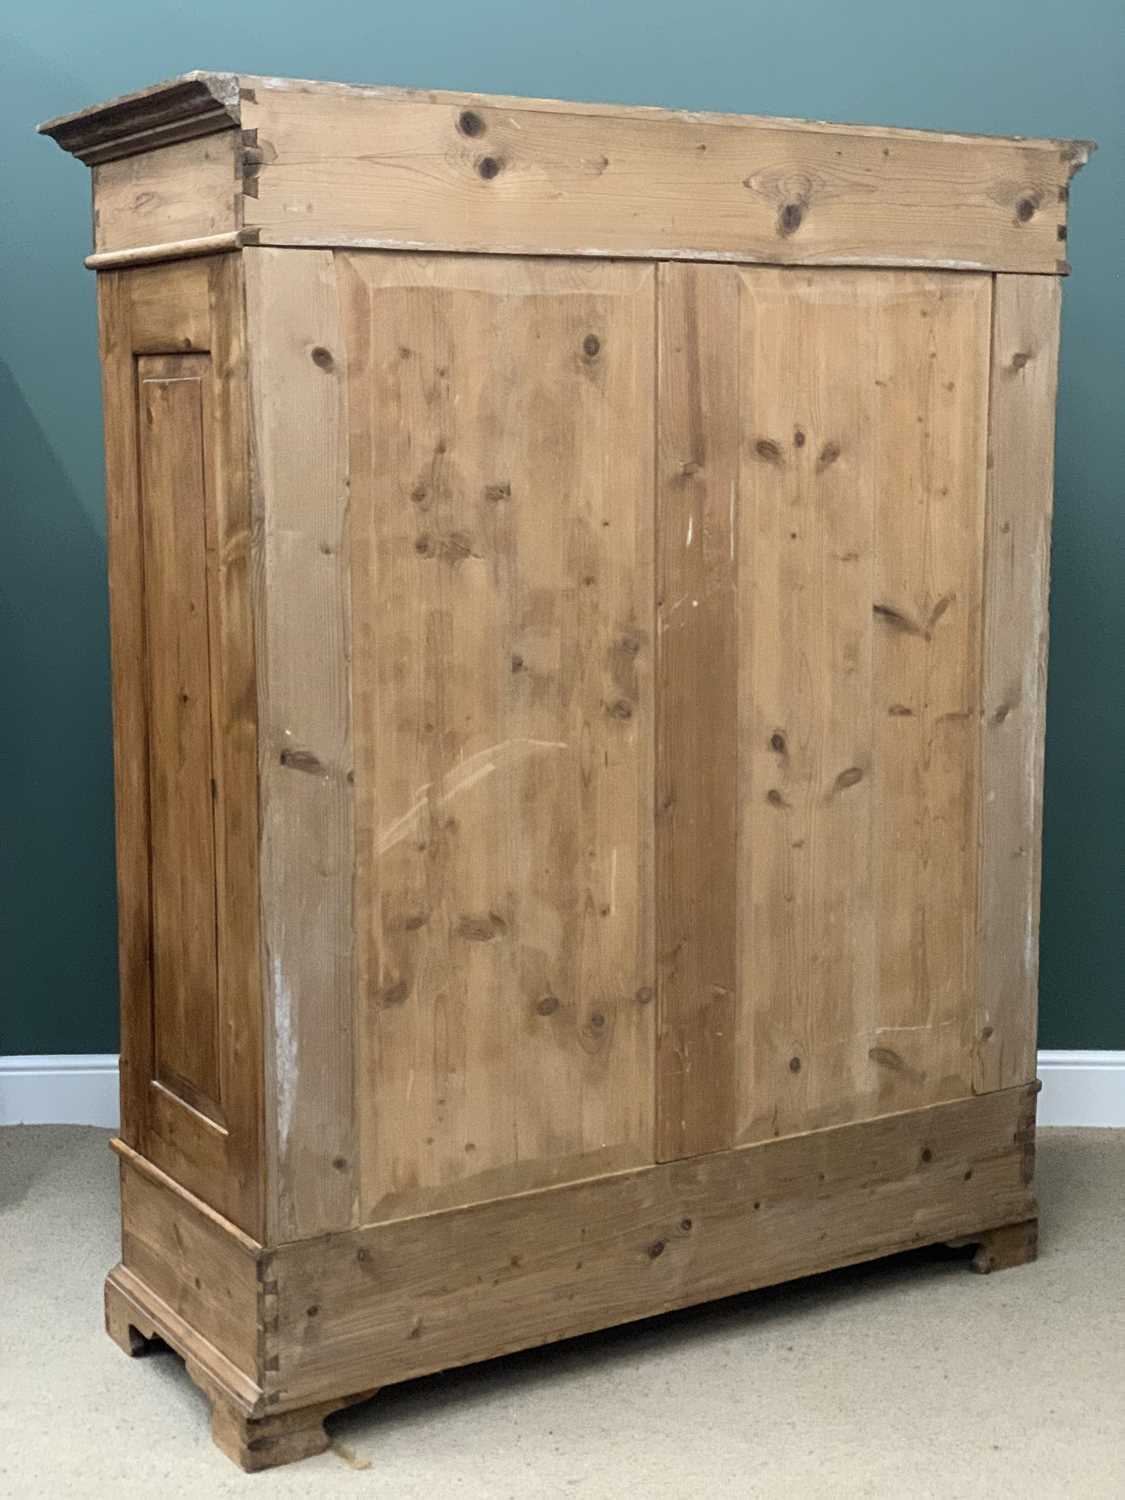 ANTIQUE PINE STYLE FRENCH TWIN-DOOR WARDROBE (Easy to dismantle) - 199cms H, 164cms W, 60cms D - Image 3 of 3